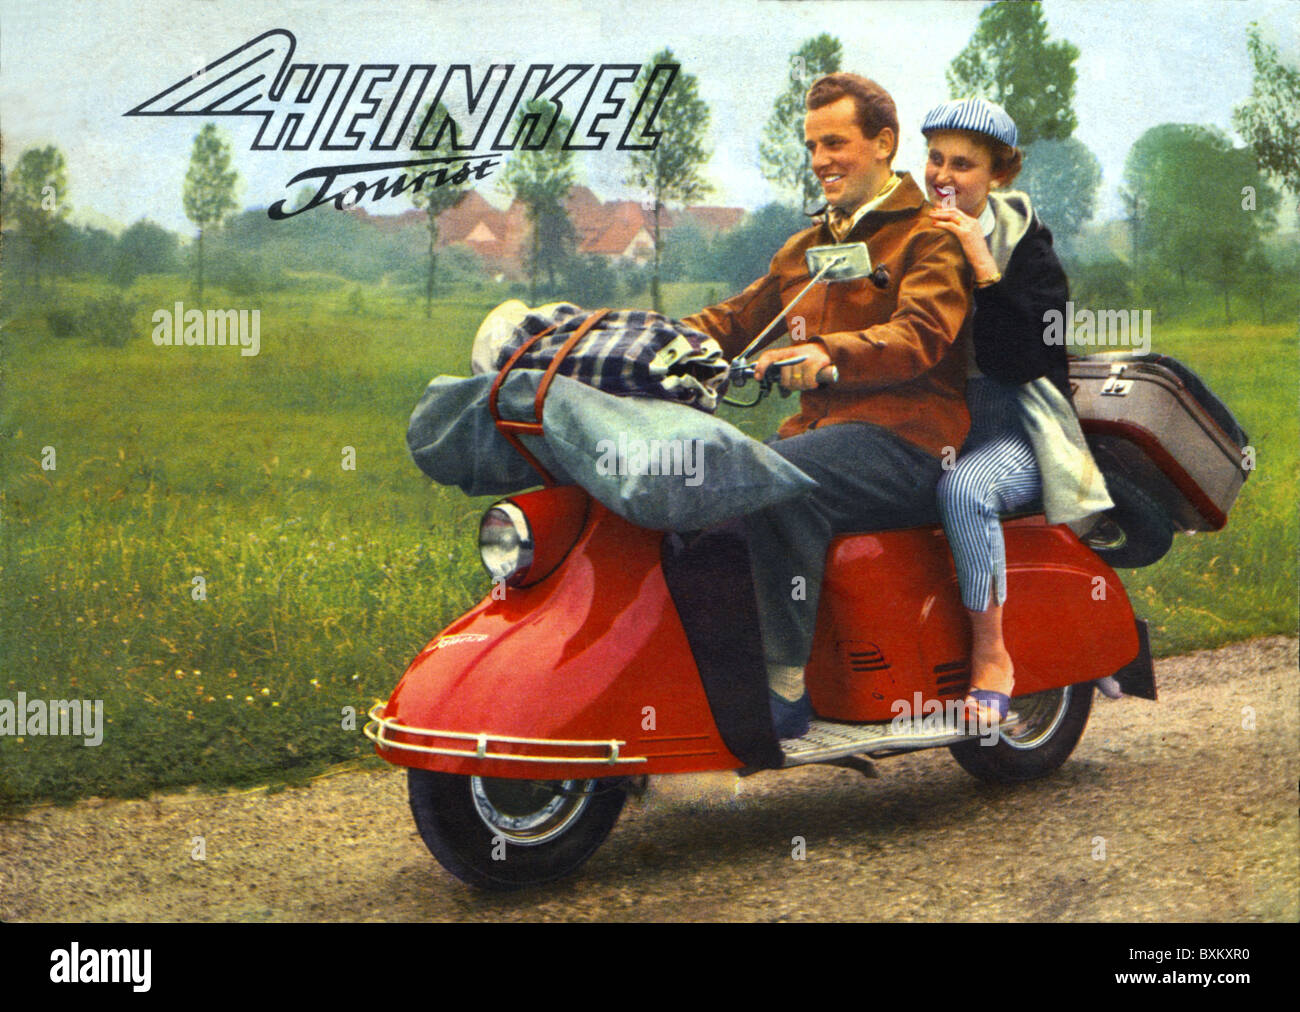 Heinkel Tourist High Resolution Stock Photography and Images - Alamy